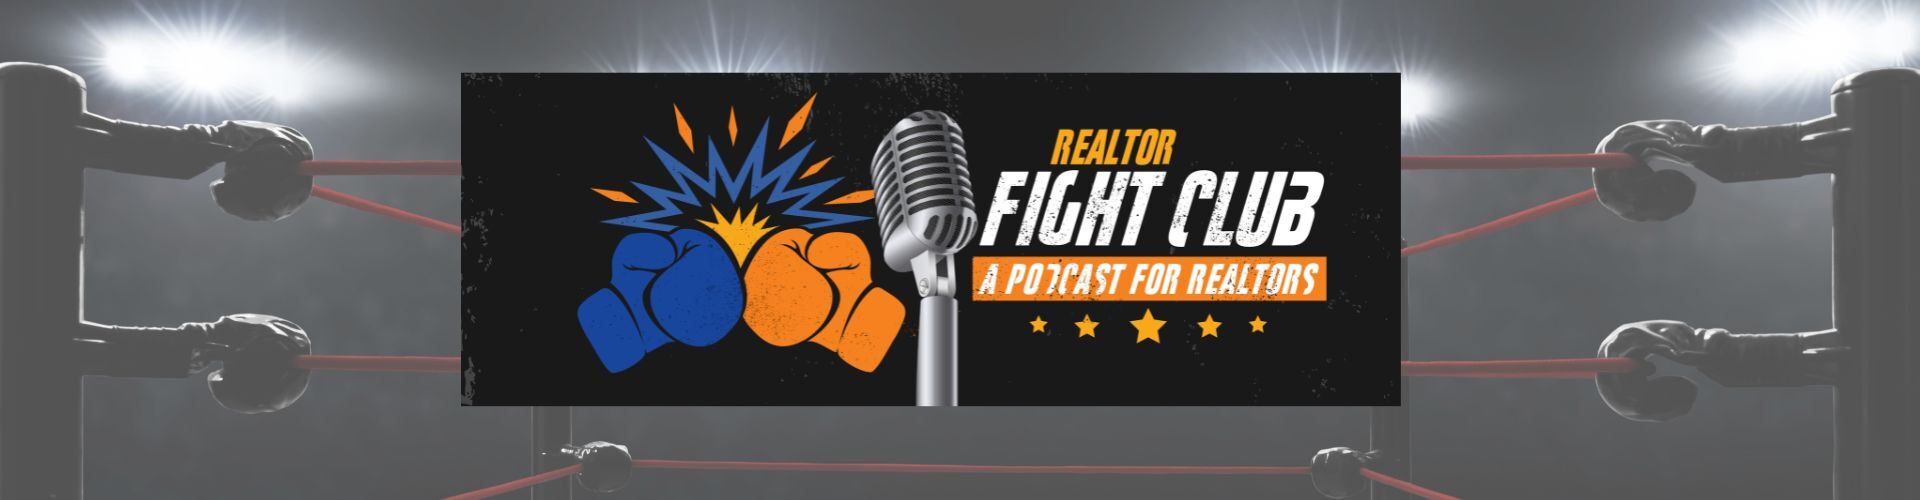 Real Estate Fight Club